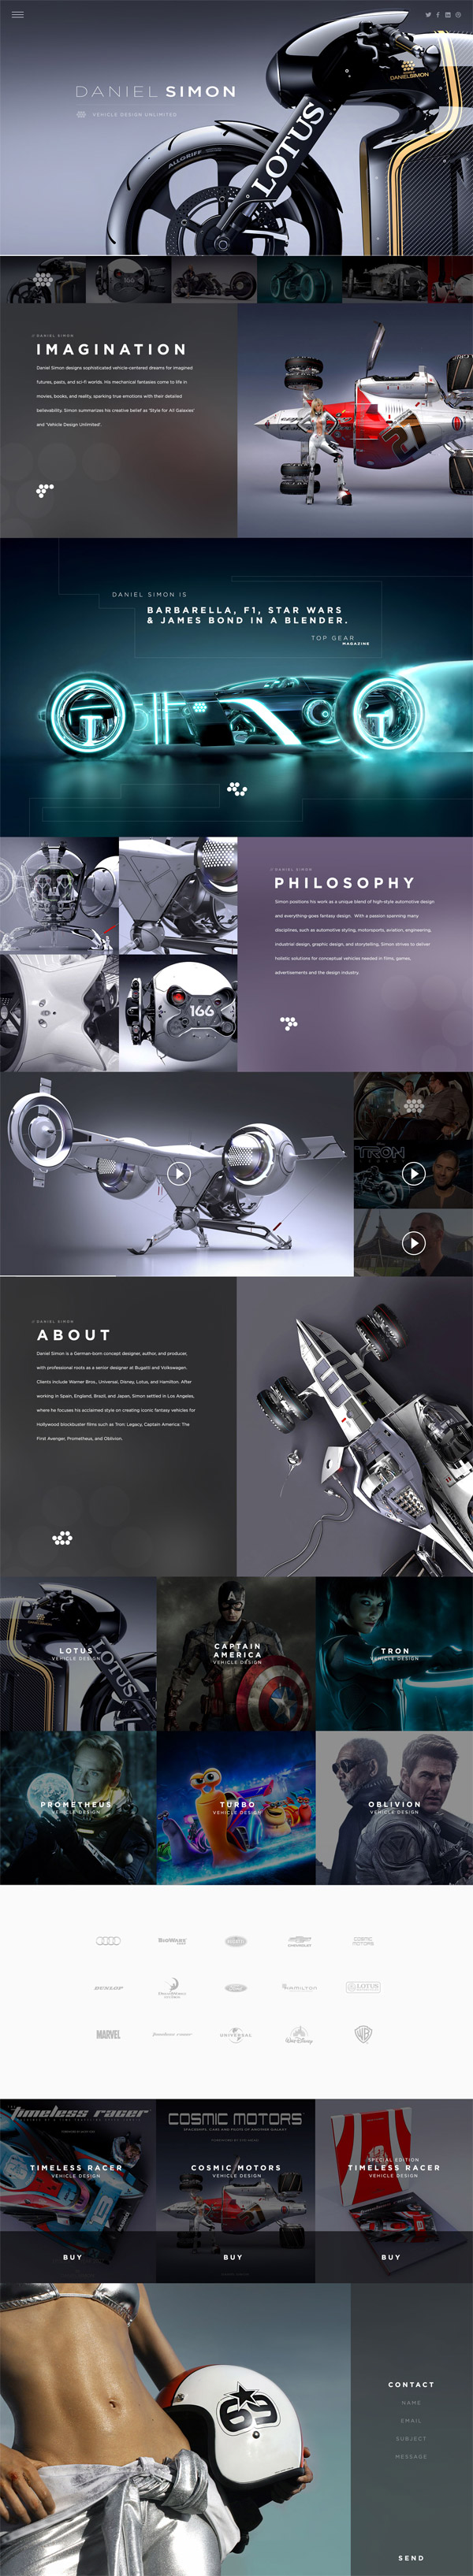 15-websites-with-full-page-designs-2